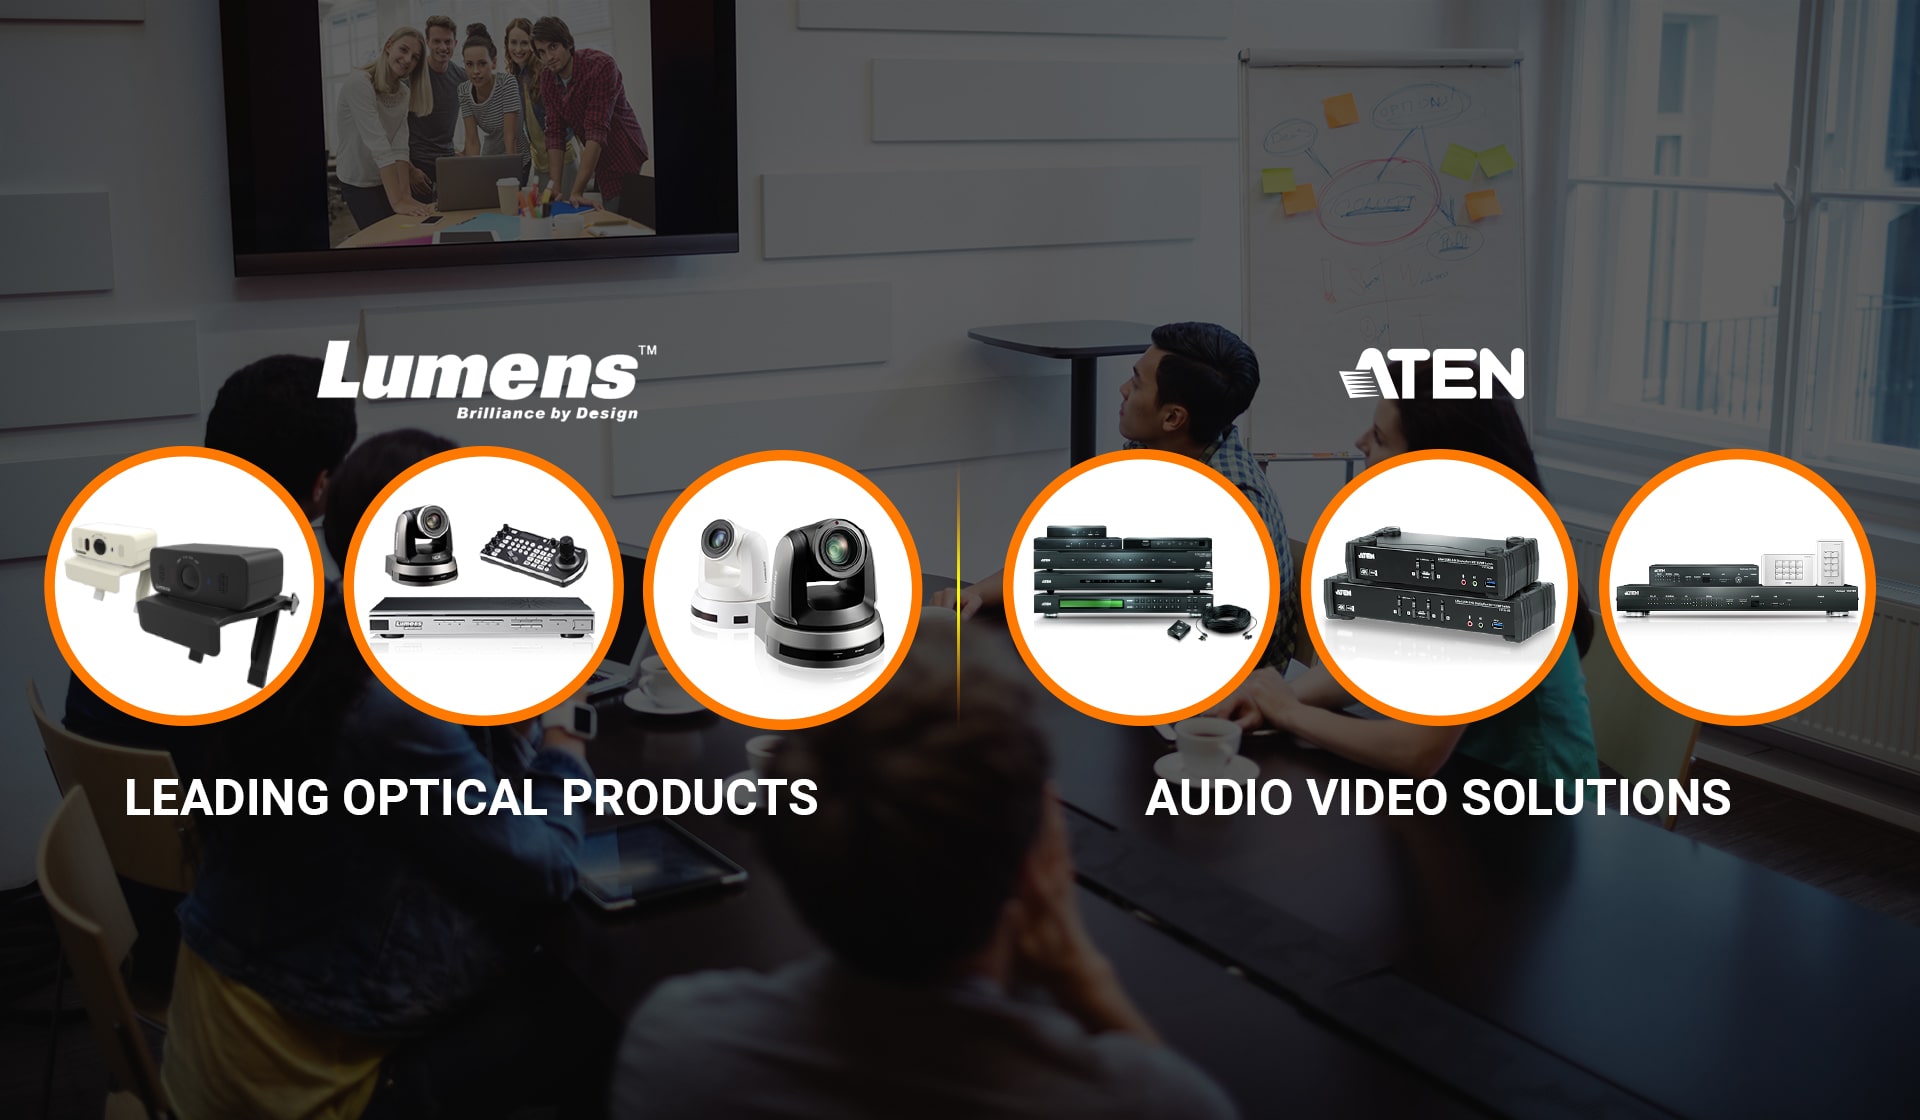 Lumens Optical products and Audio Video solutions